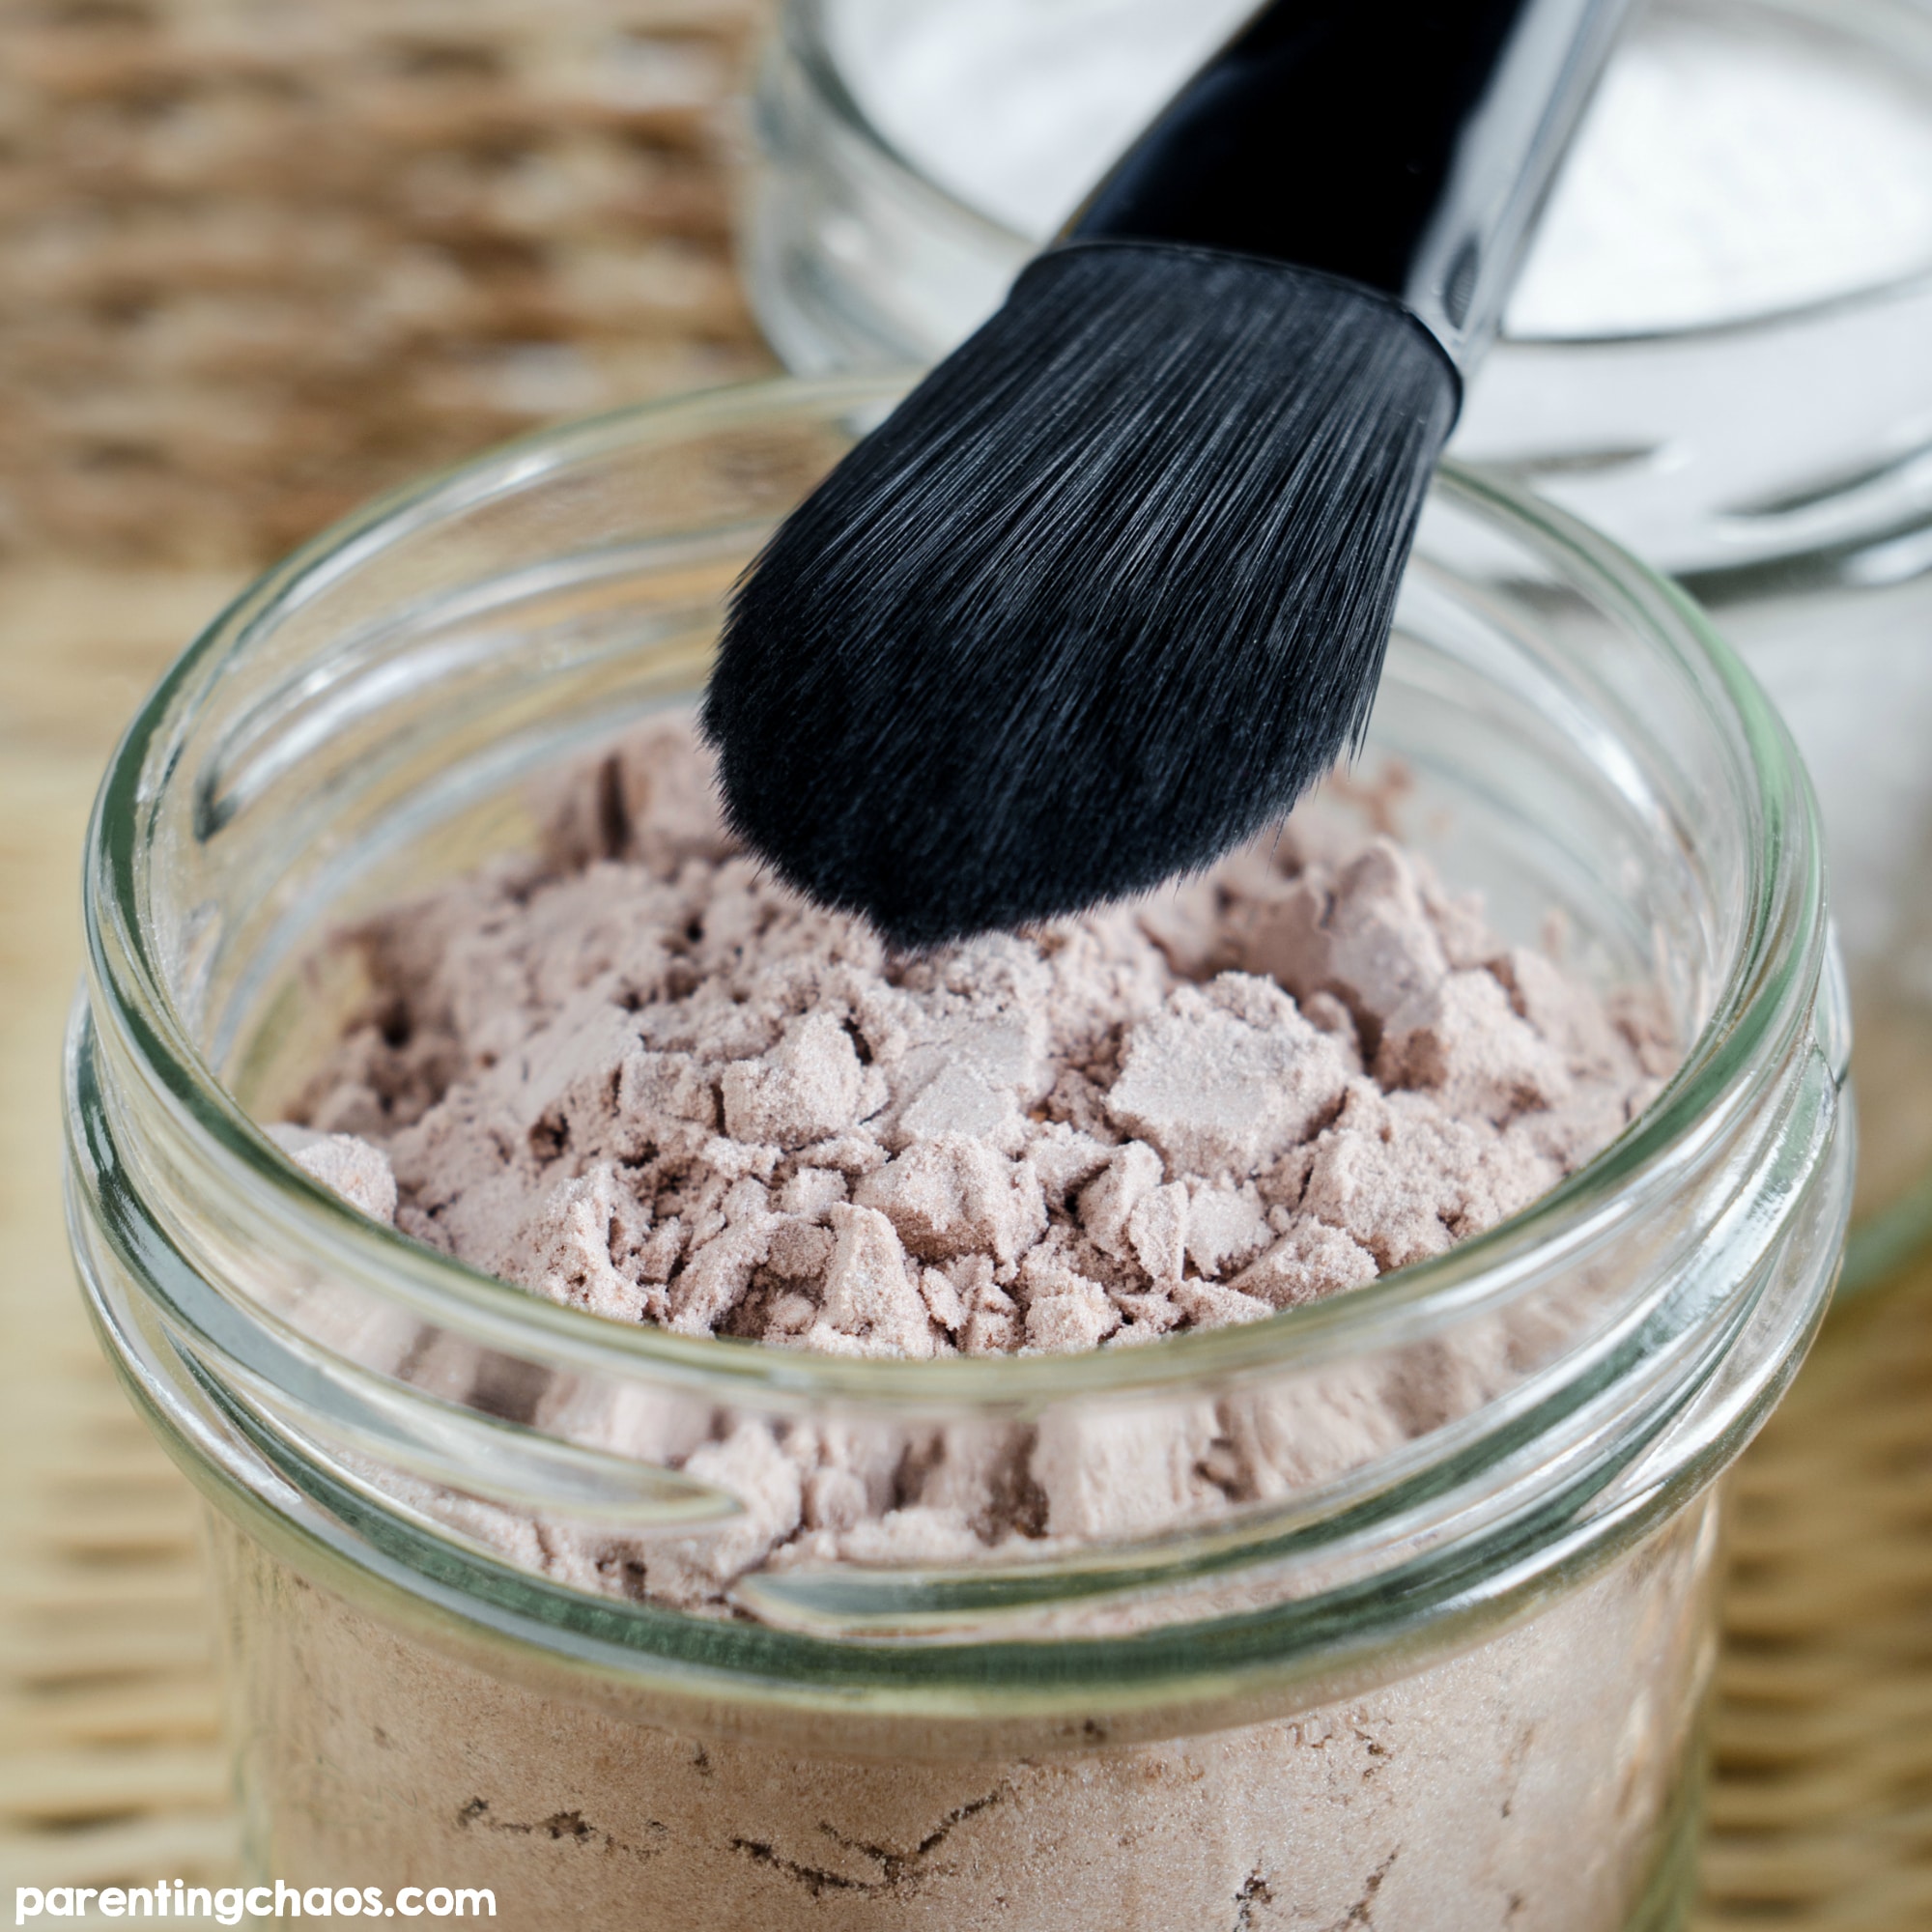 How to Make Homemade Mineral Foundation